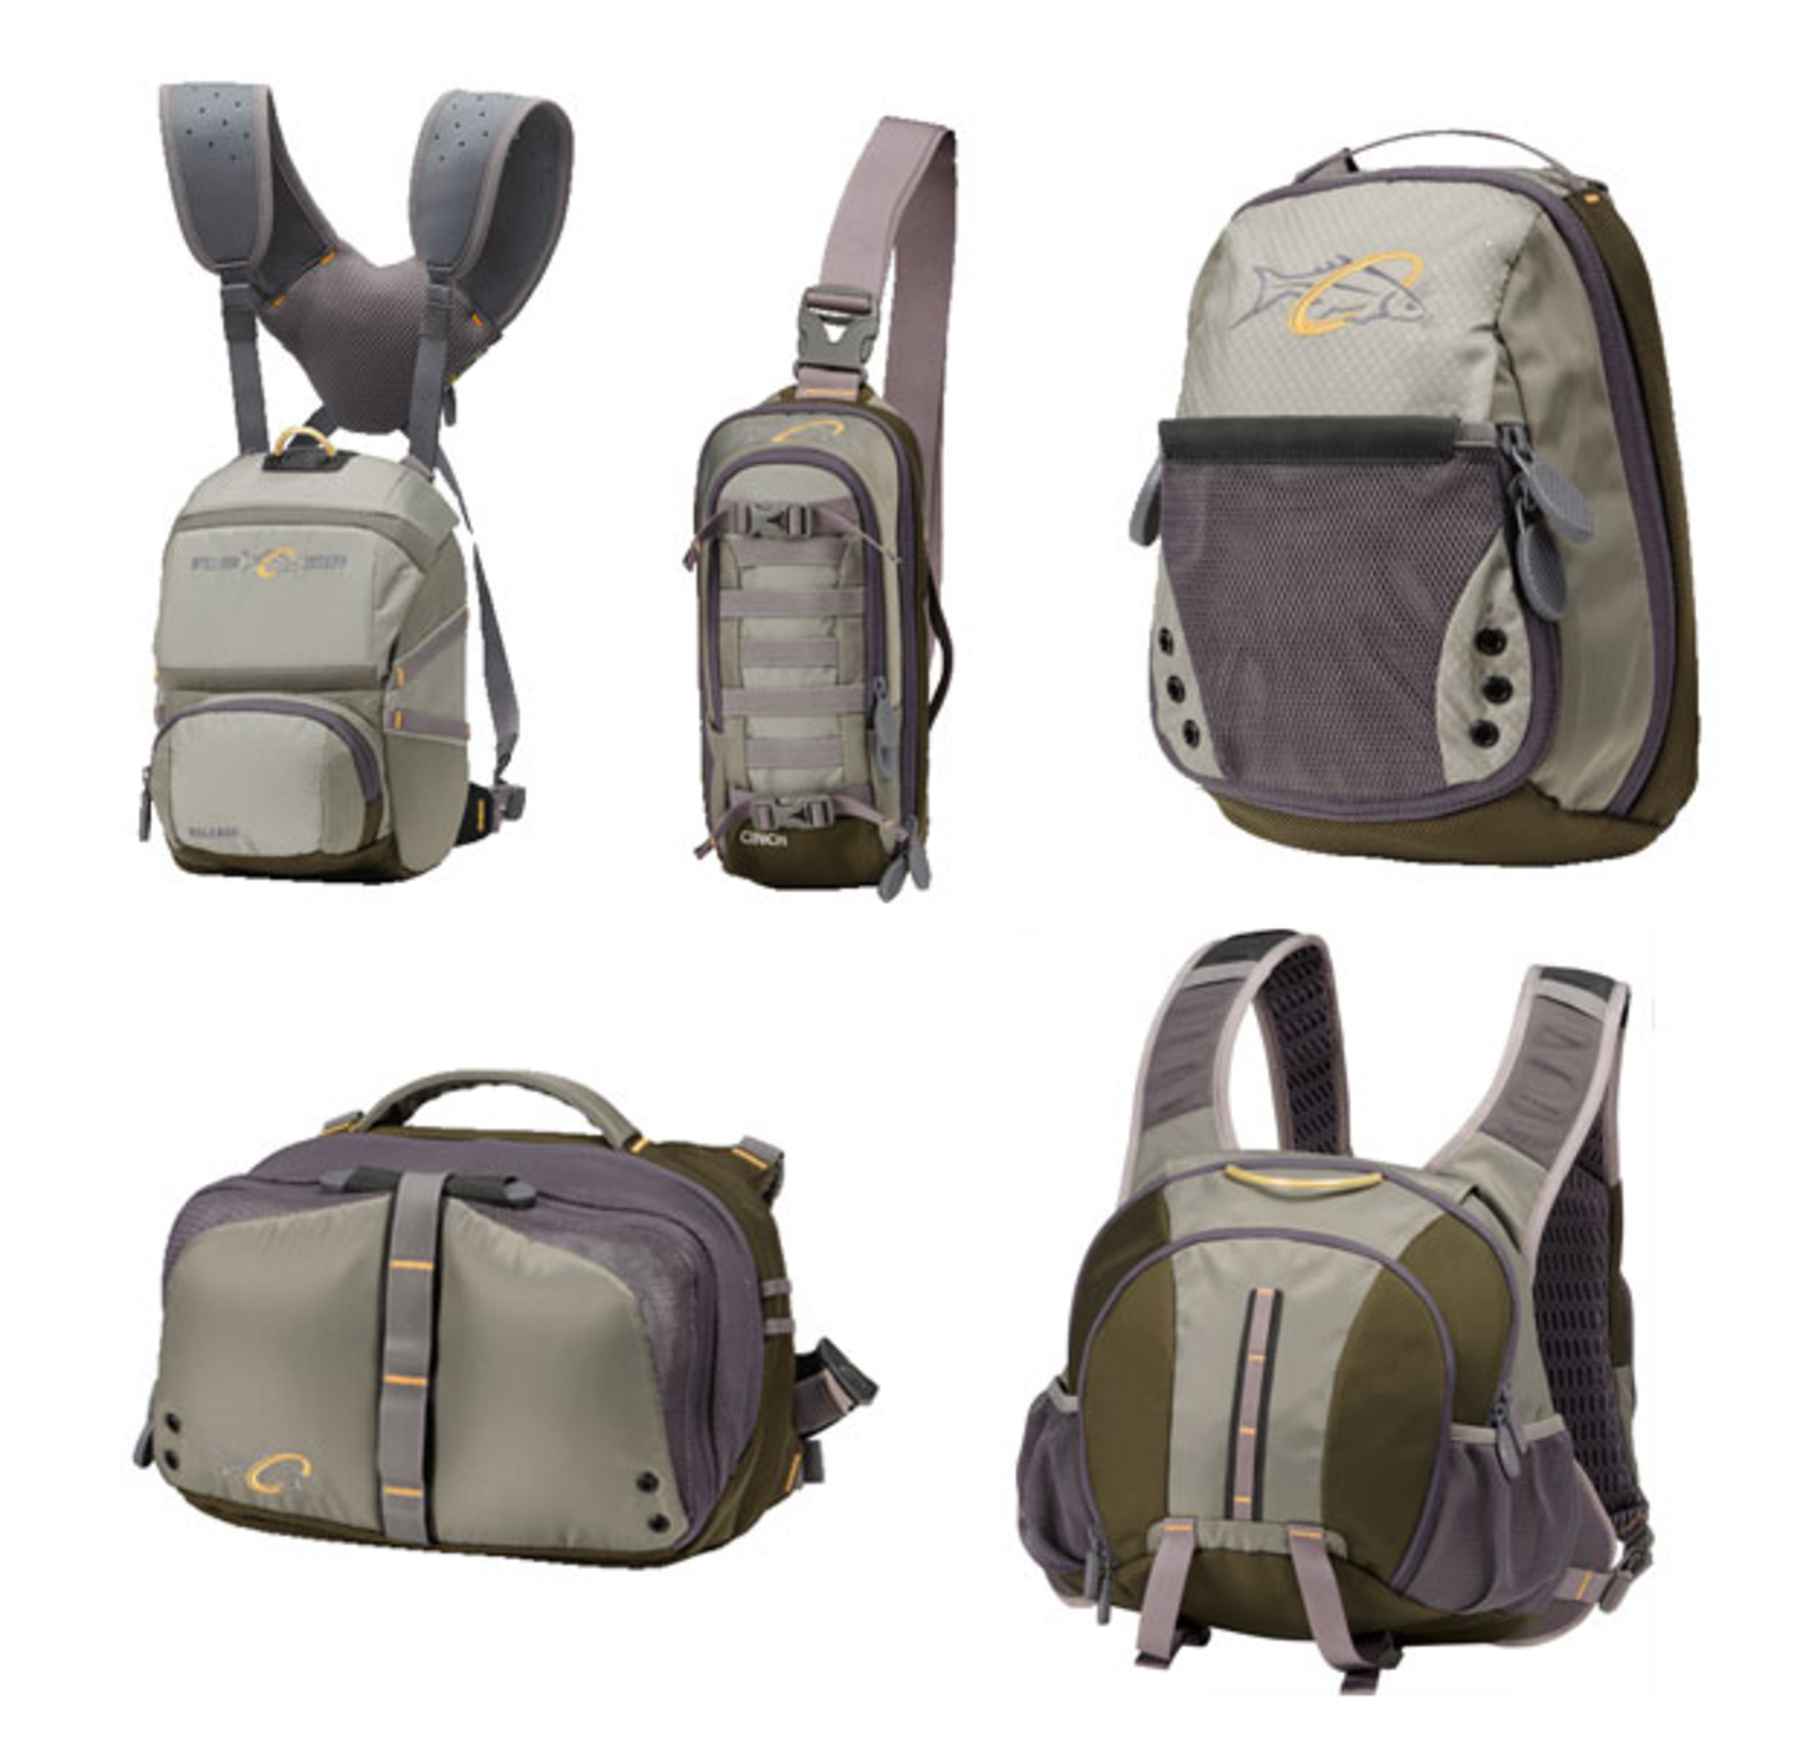 William Joseph Outs Five All-New Fly Fishing Packs for 2014